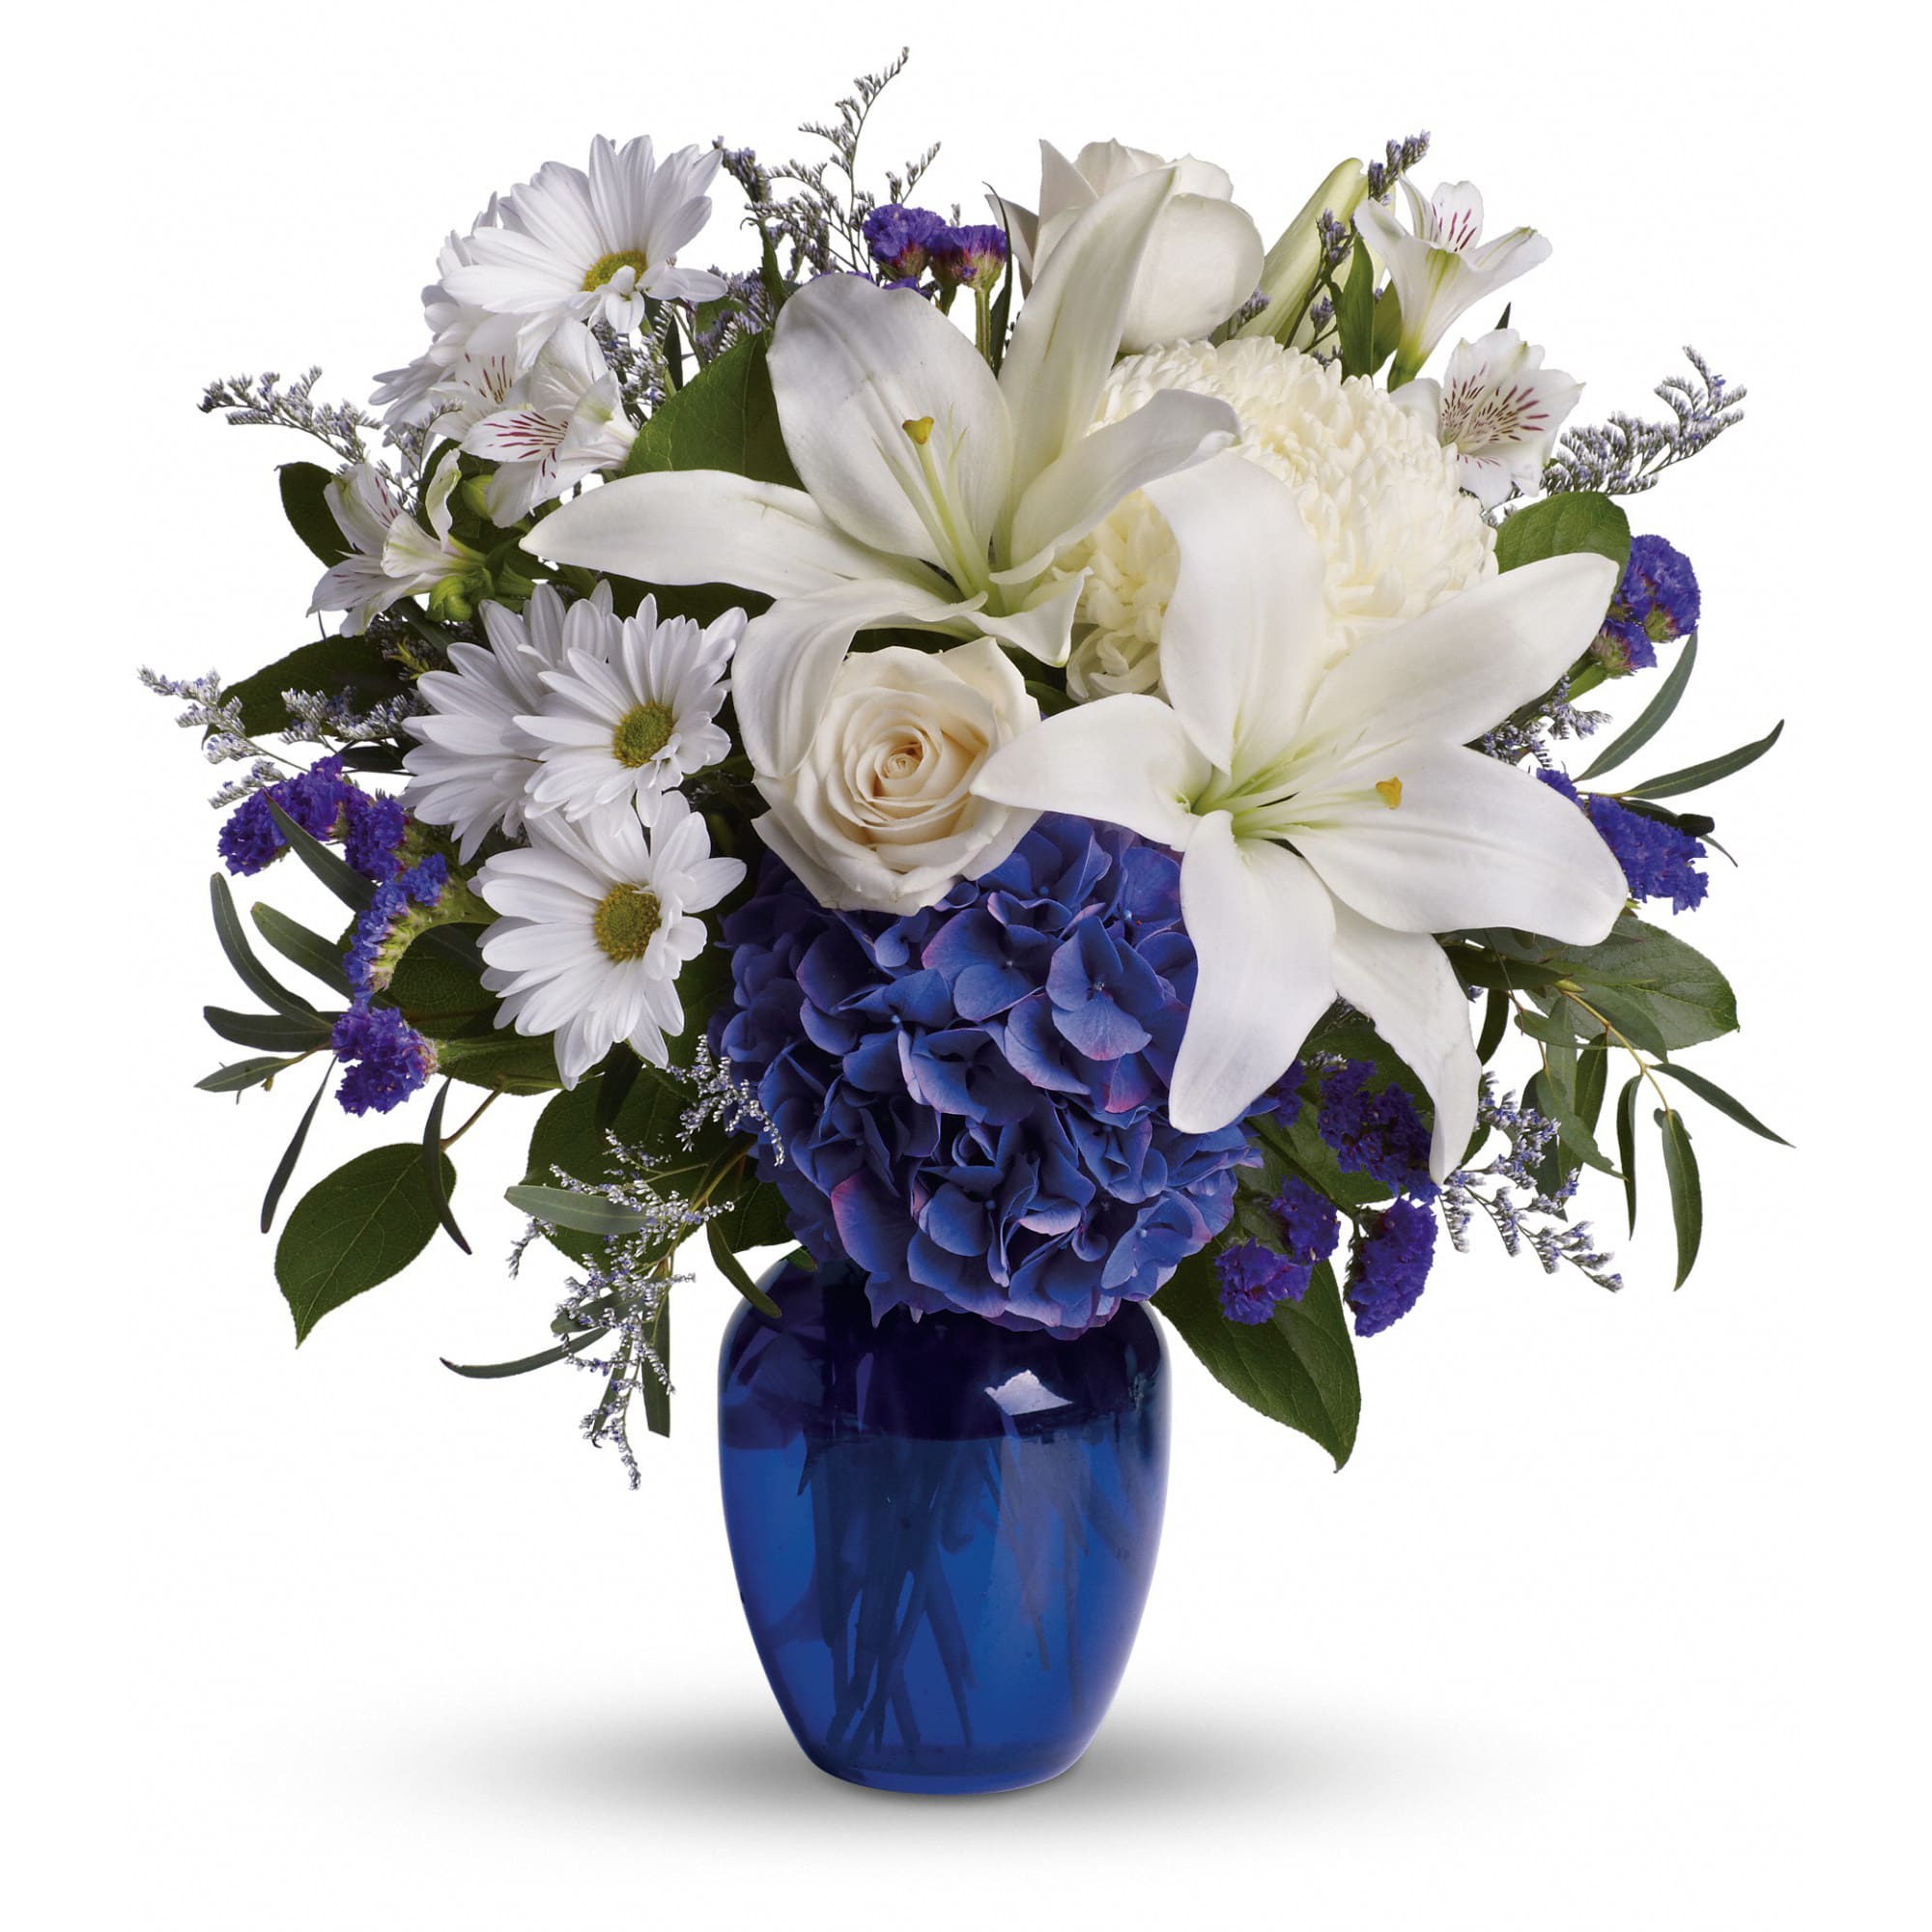 Beautiful in Blue - In this arrangement, the serenity of the color blue along with the purity of intention symbolized by white will let the family know you are sending your calm strength to them during these difficult times. T209-3A